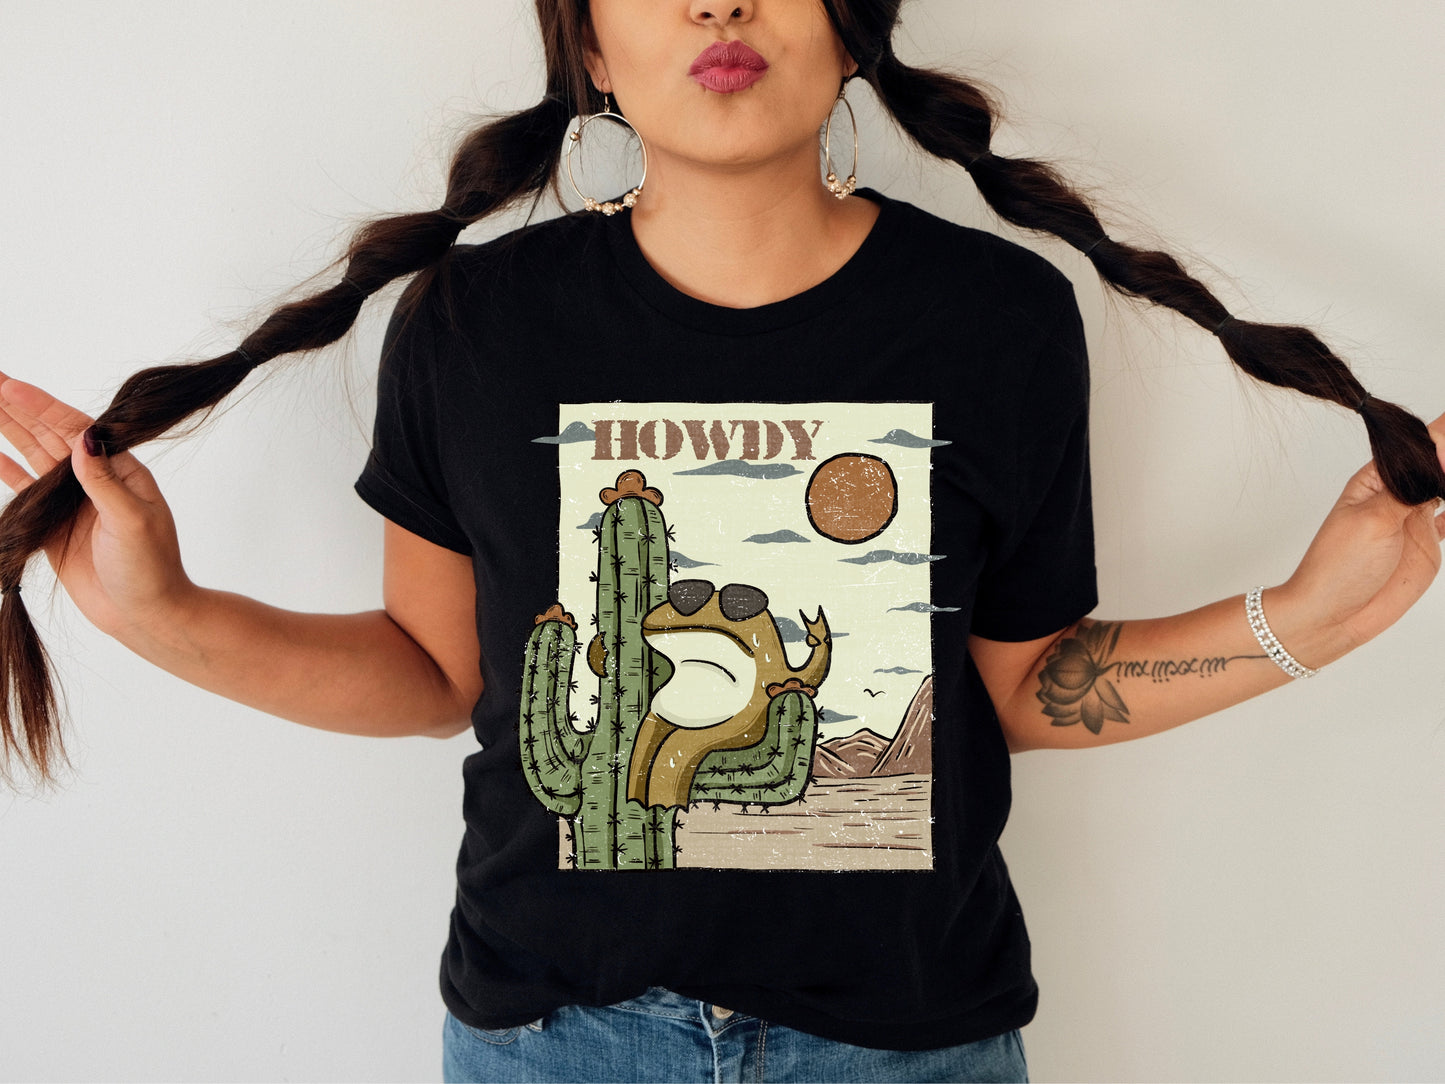 Howdy Frog T-shirt